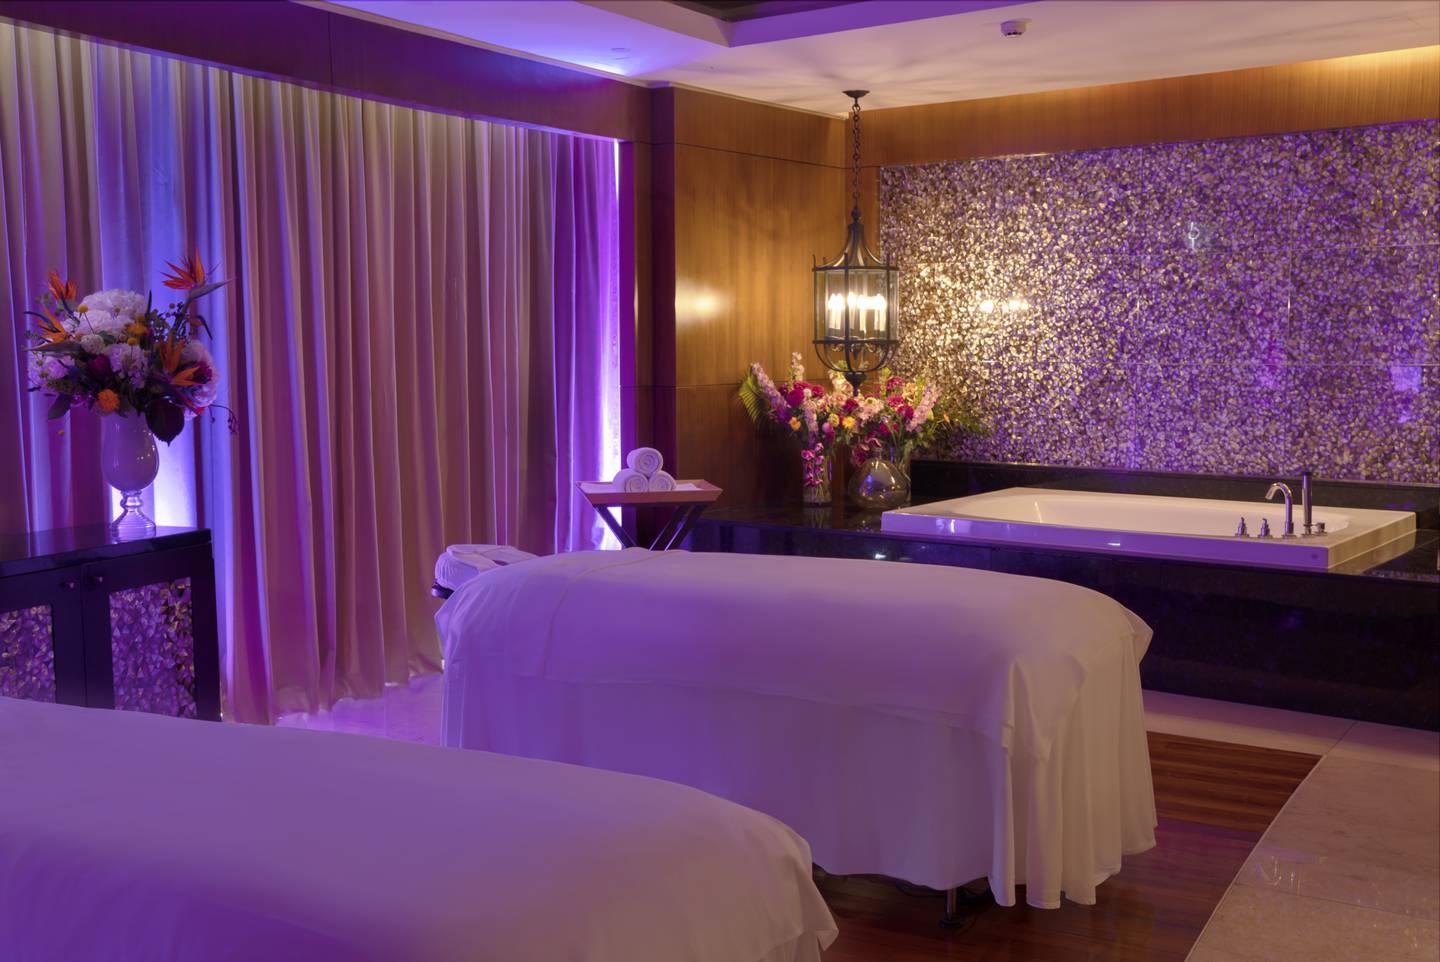 The Claire Luxton Experience - SPA InterContinental. Photo: The Claire Luxton